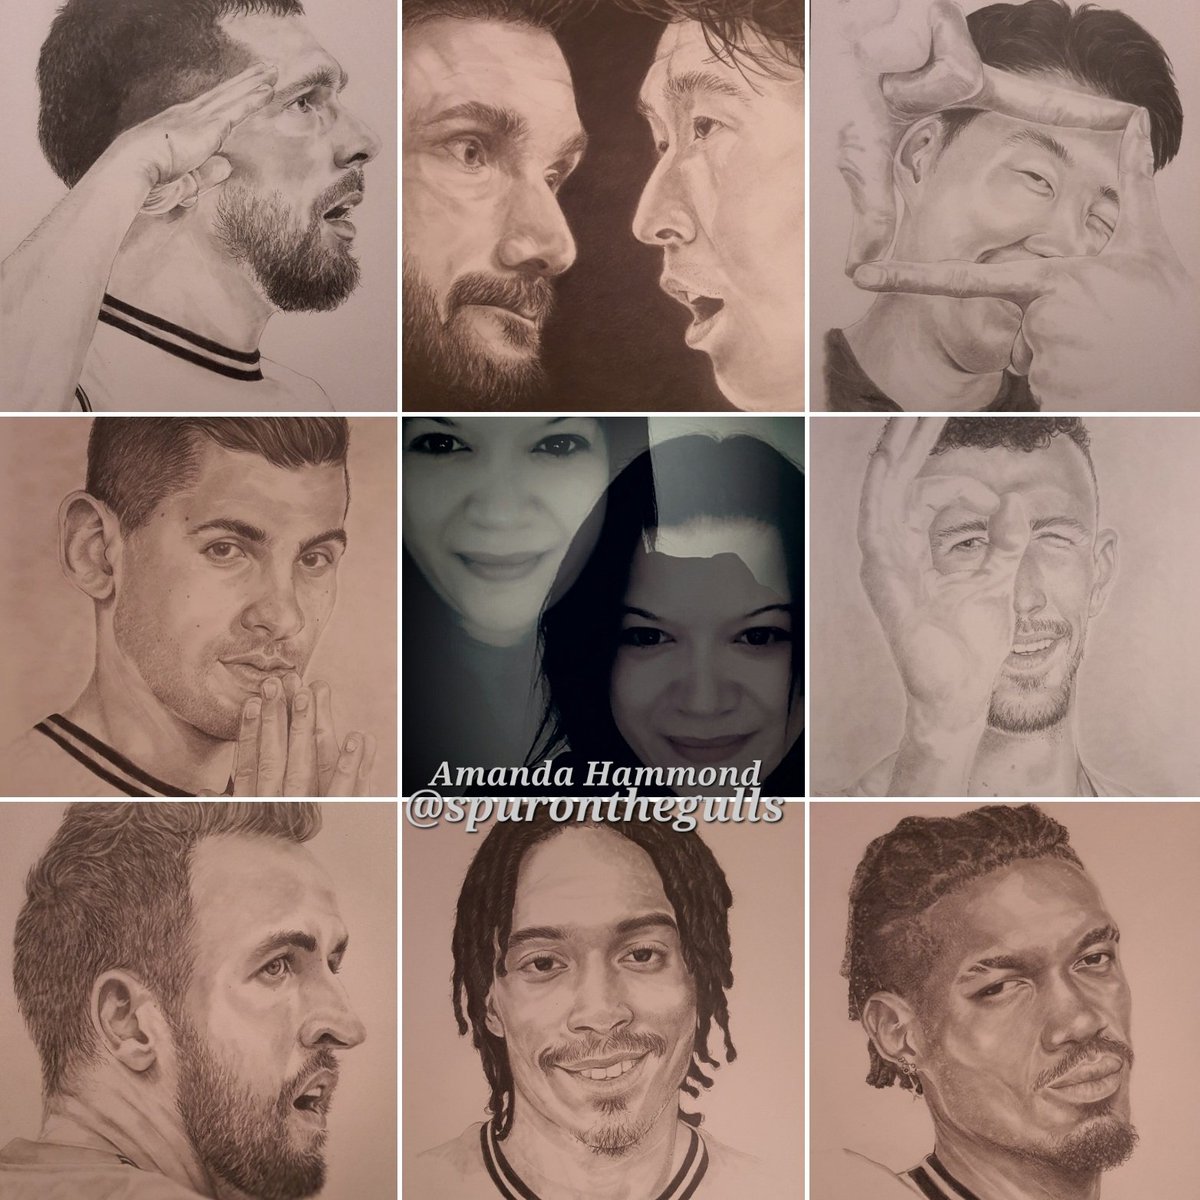 Here's some of my latest sketches of our amazing team @SpursOfficial

Thank you for your support over the years everyone, much appreciated 
#PierreEmileHøjbjerg #Hugolloris #Sonny #HeungMinSon #ChristianRomero #IvanPerisic #HarryKane #DjedSpence #YvesBissouma 
#COYS #THFC #Spurs